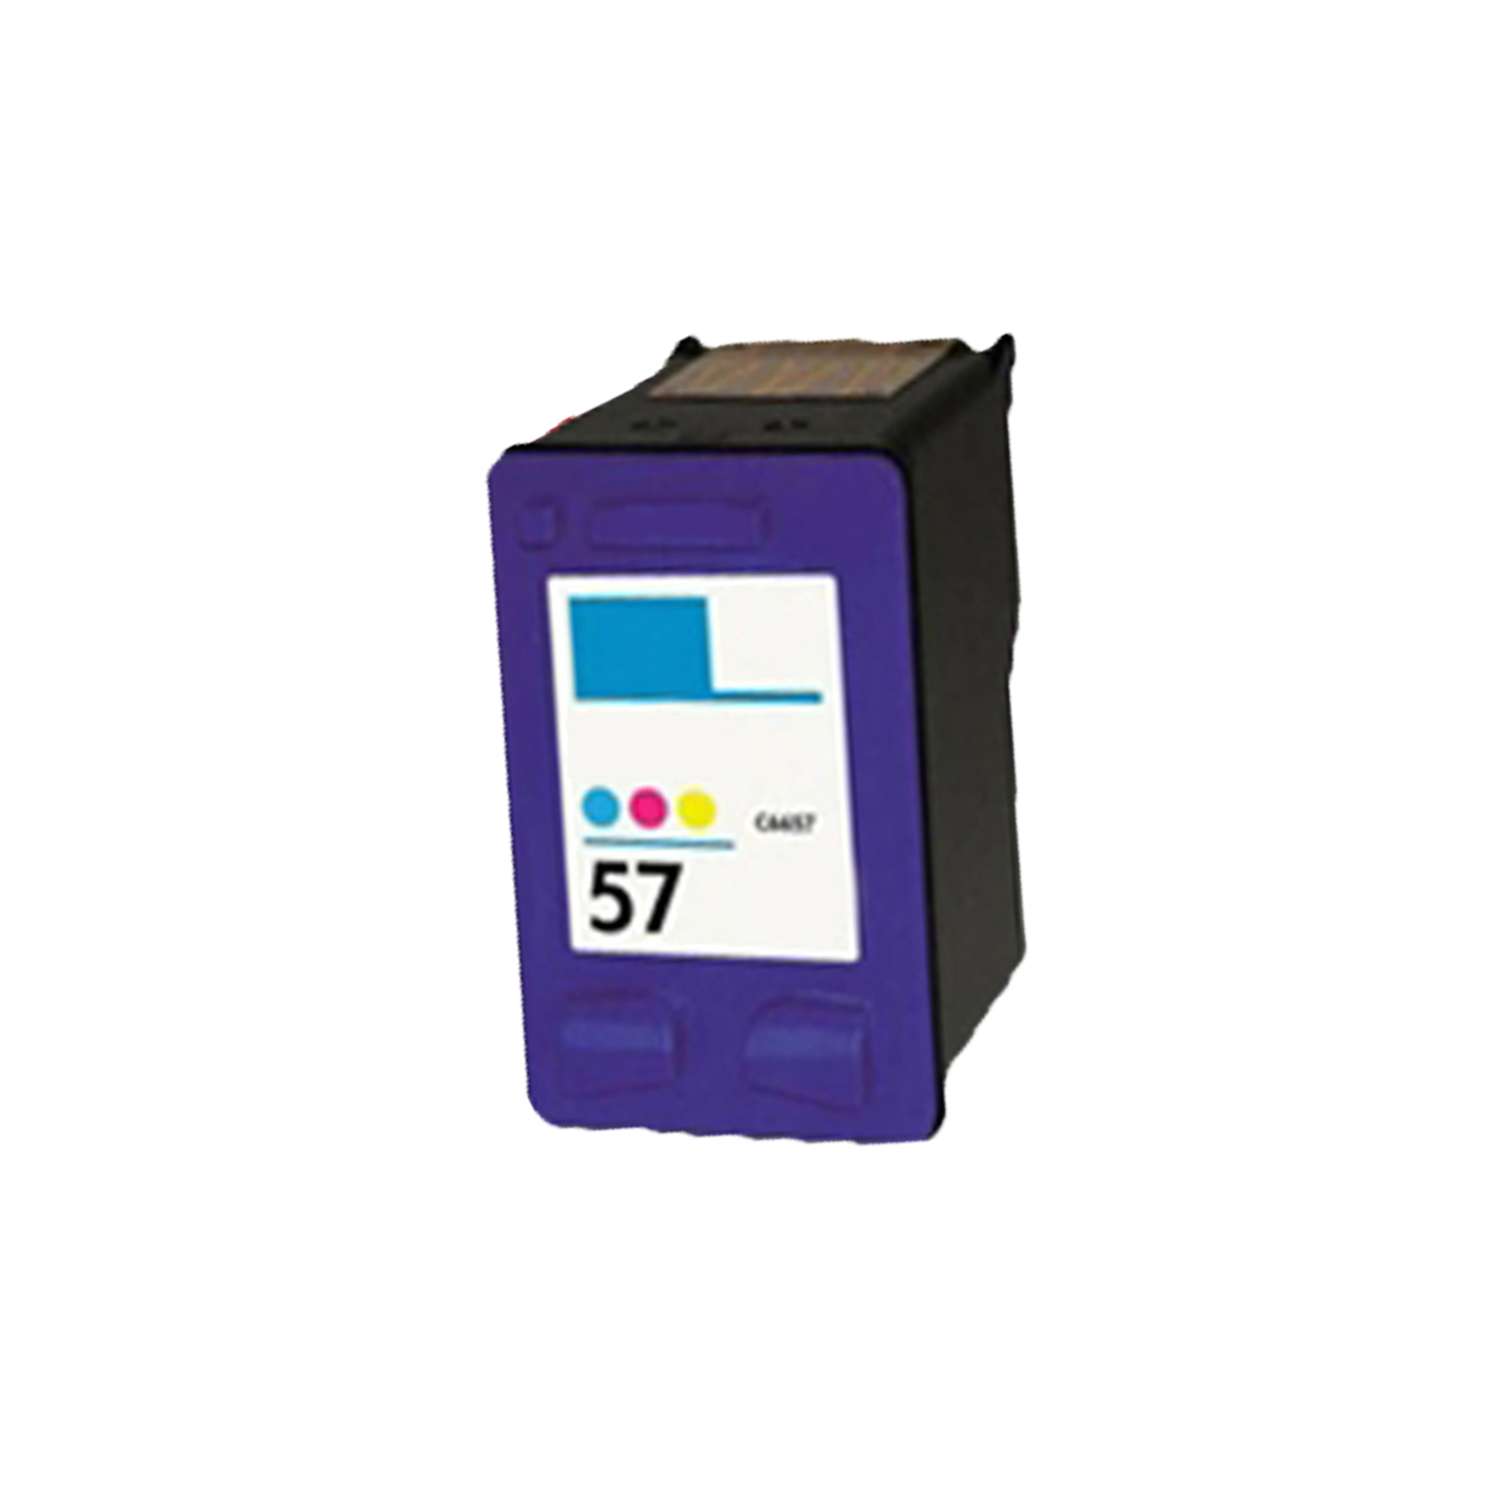 1 Pack Remanufactured with C6657 HP 57 Ink Cartridge for HP Deskjet 3550 5550 5652 9650 9680